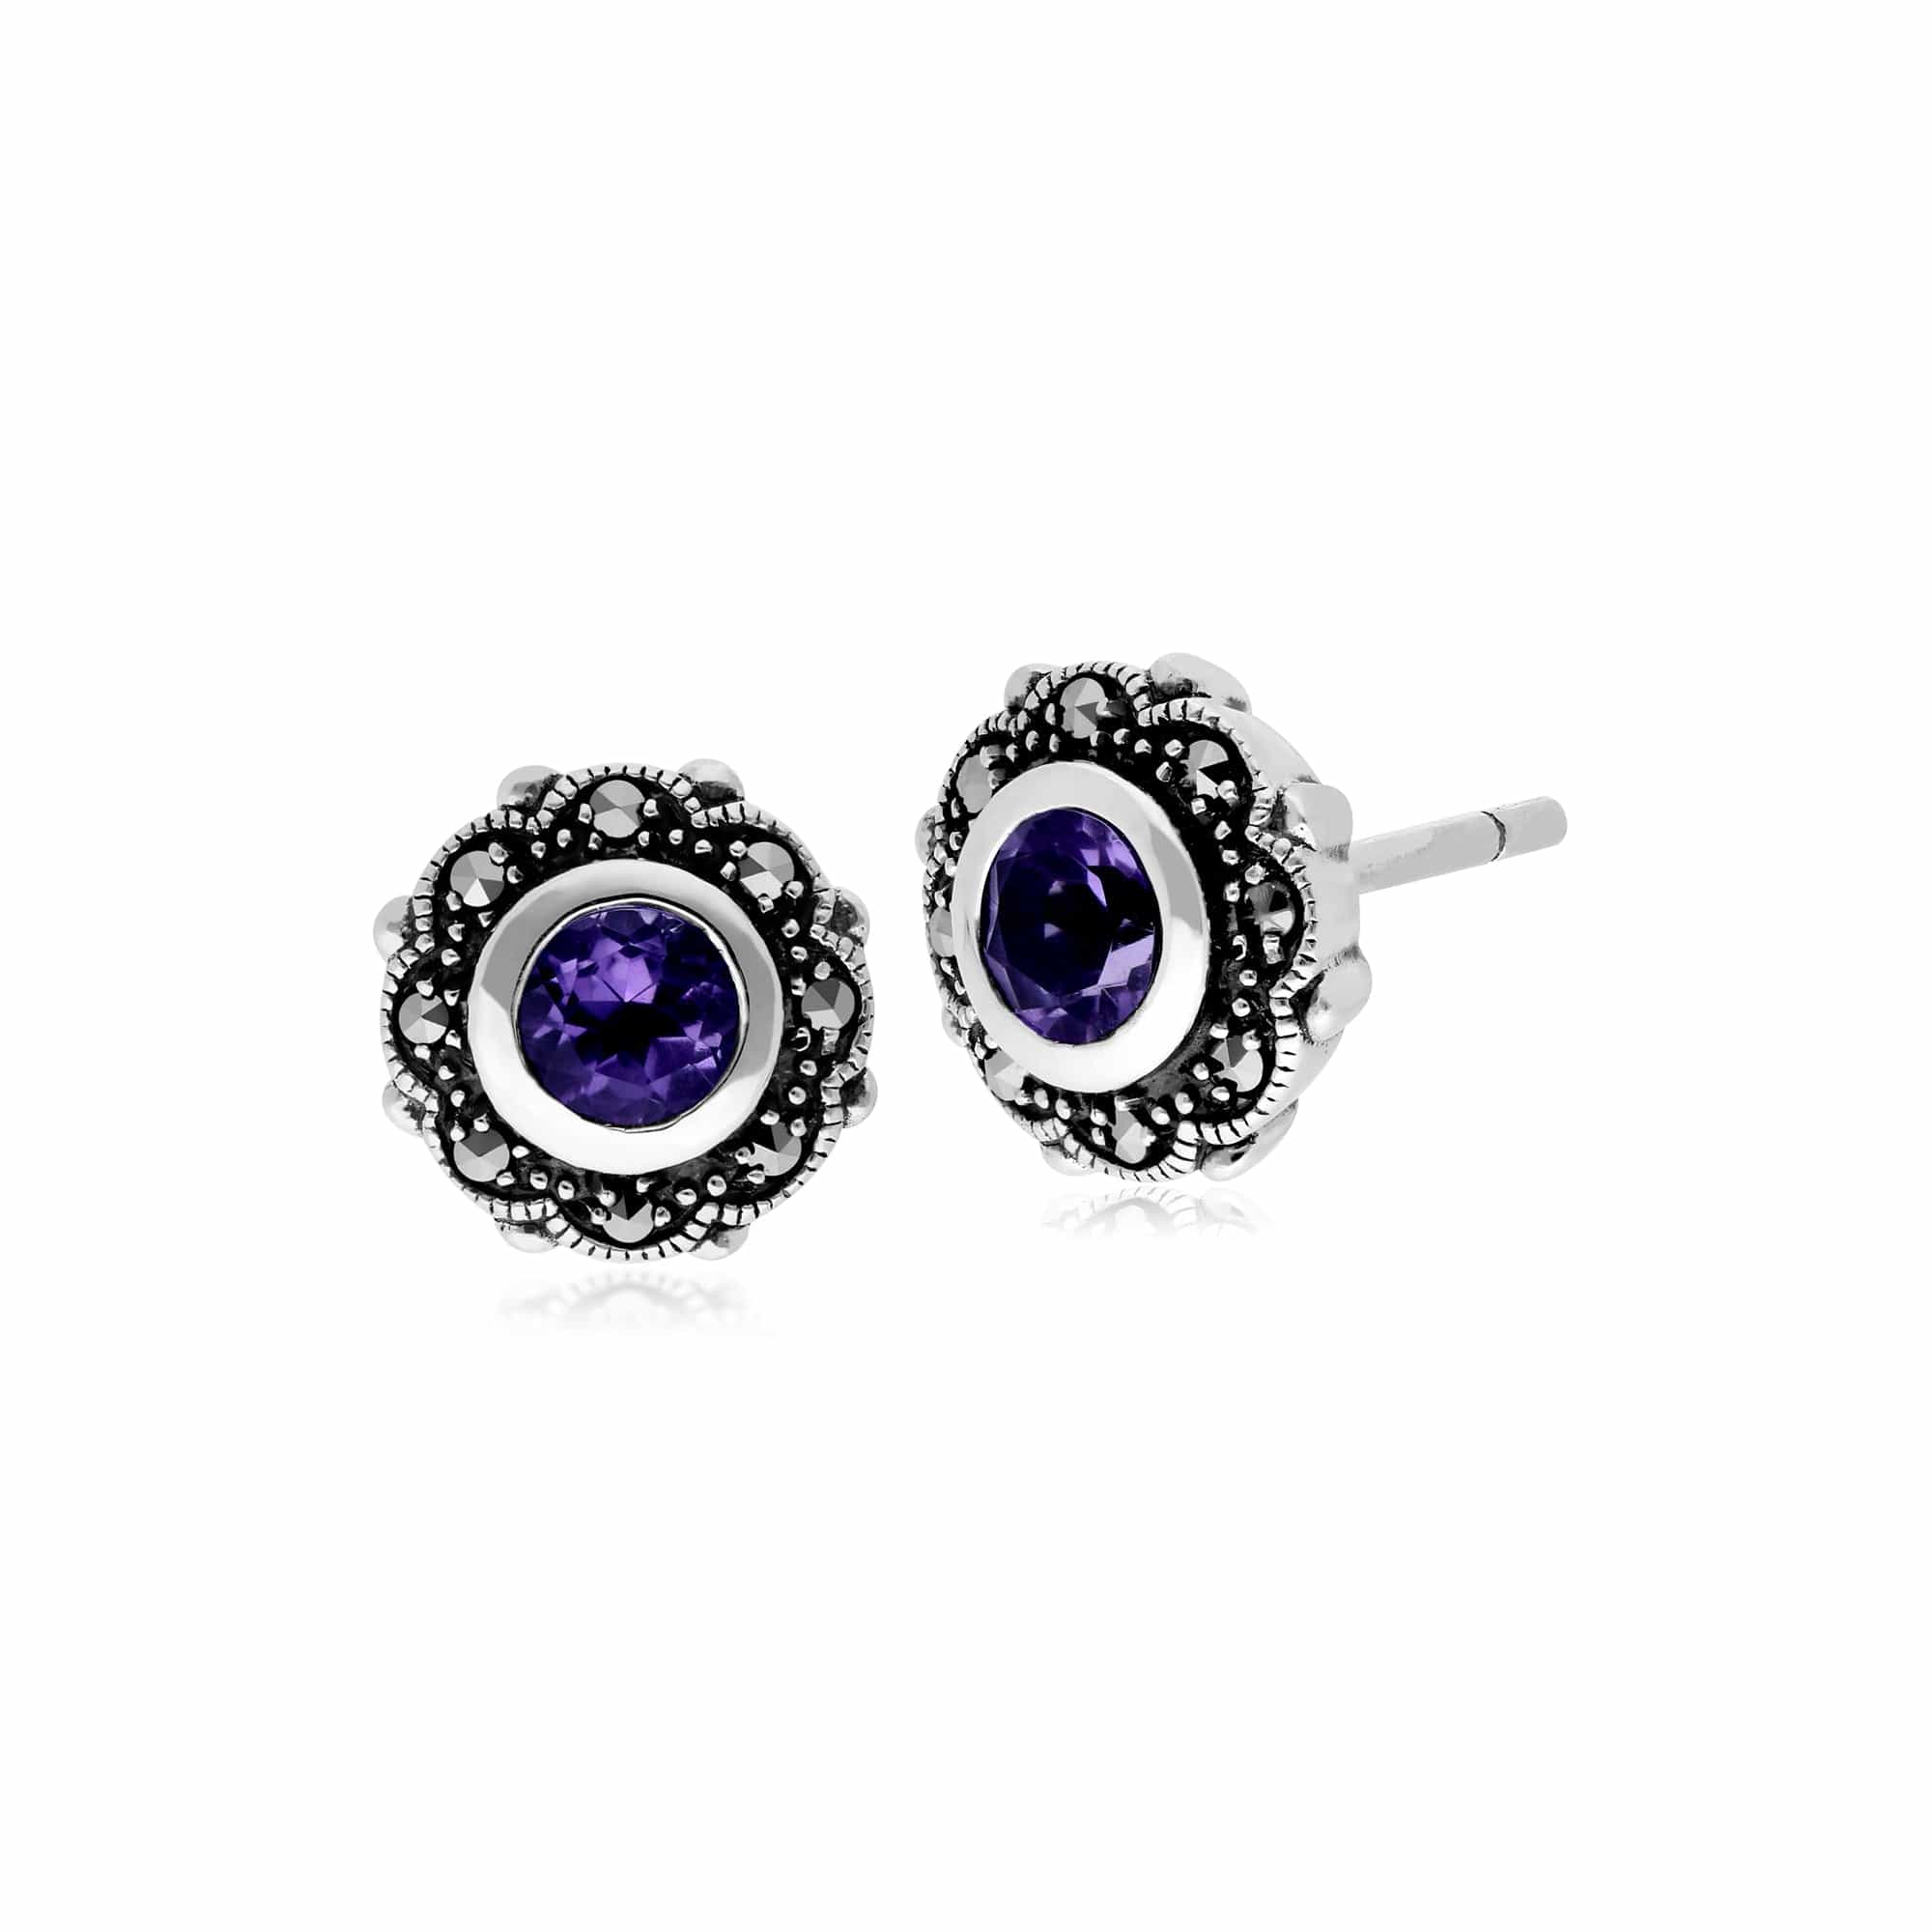 214E852402925 Art Nouveau Style Round Amethyst & Marcasite Floral Stud Earrings in 925 Sterling Silver 1